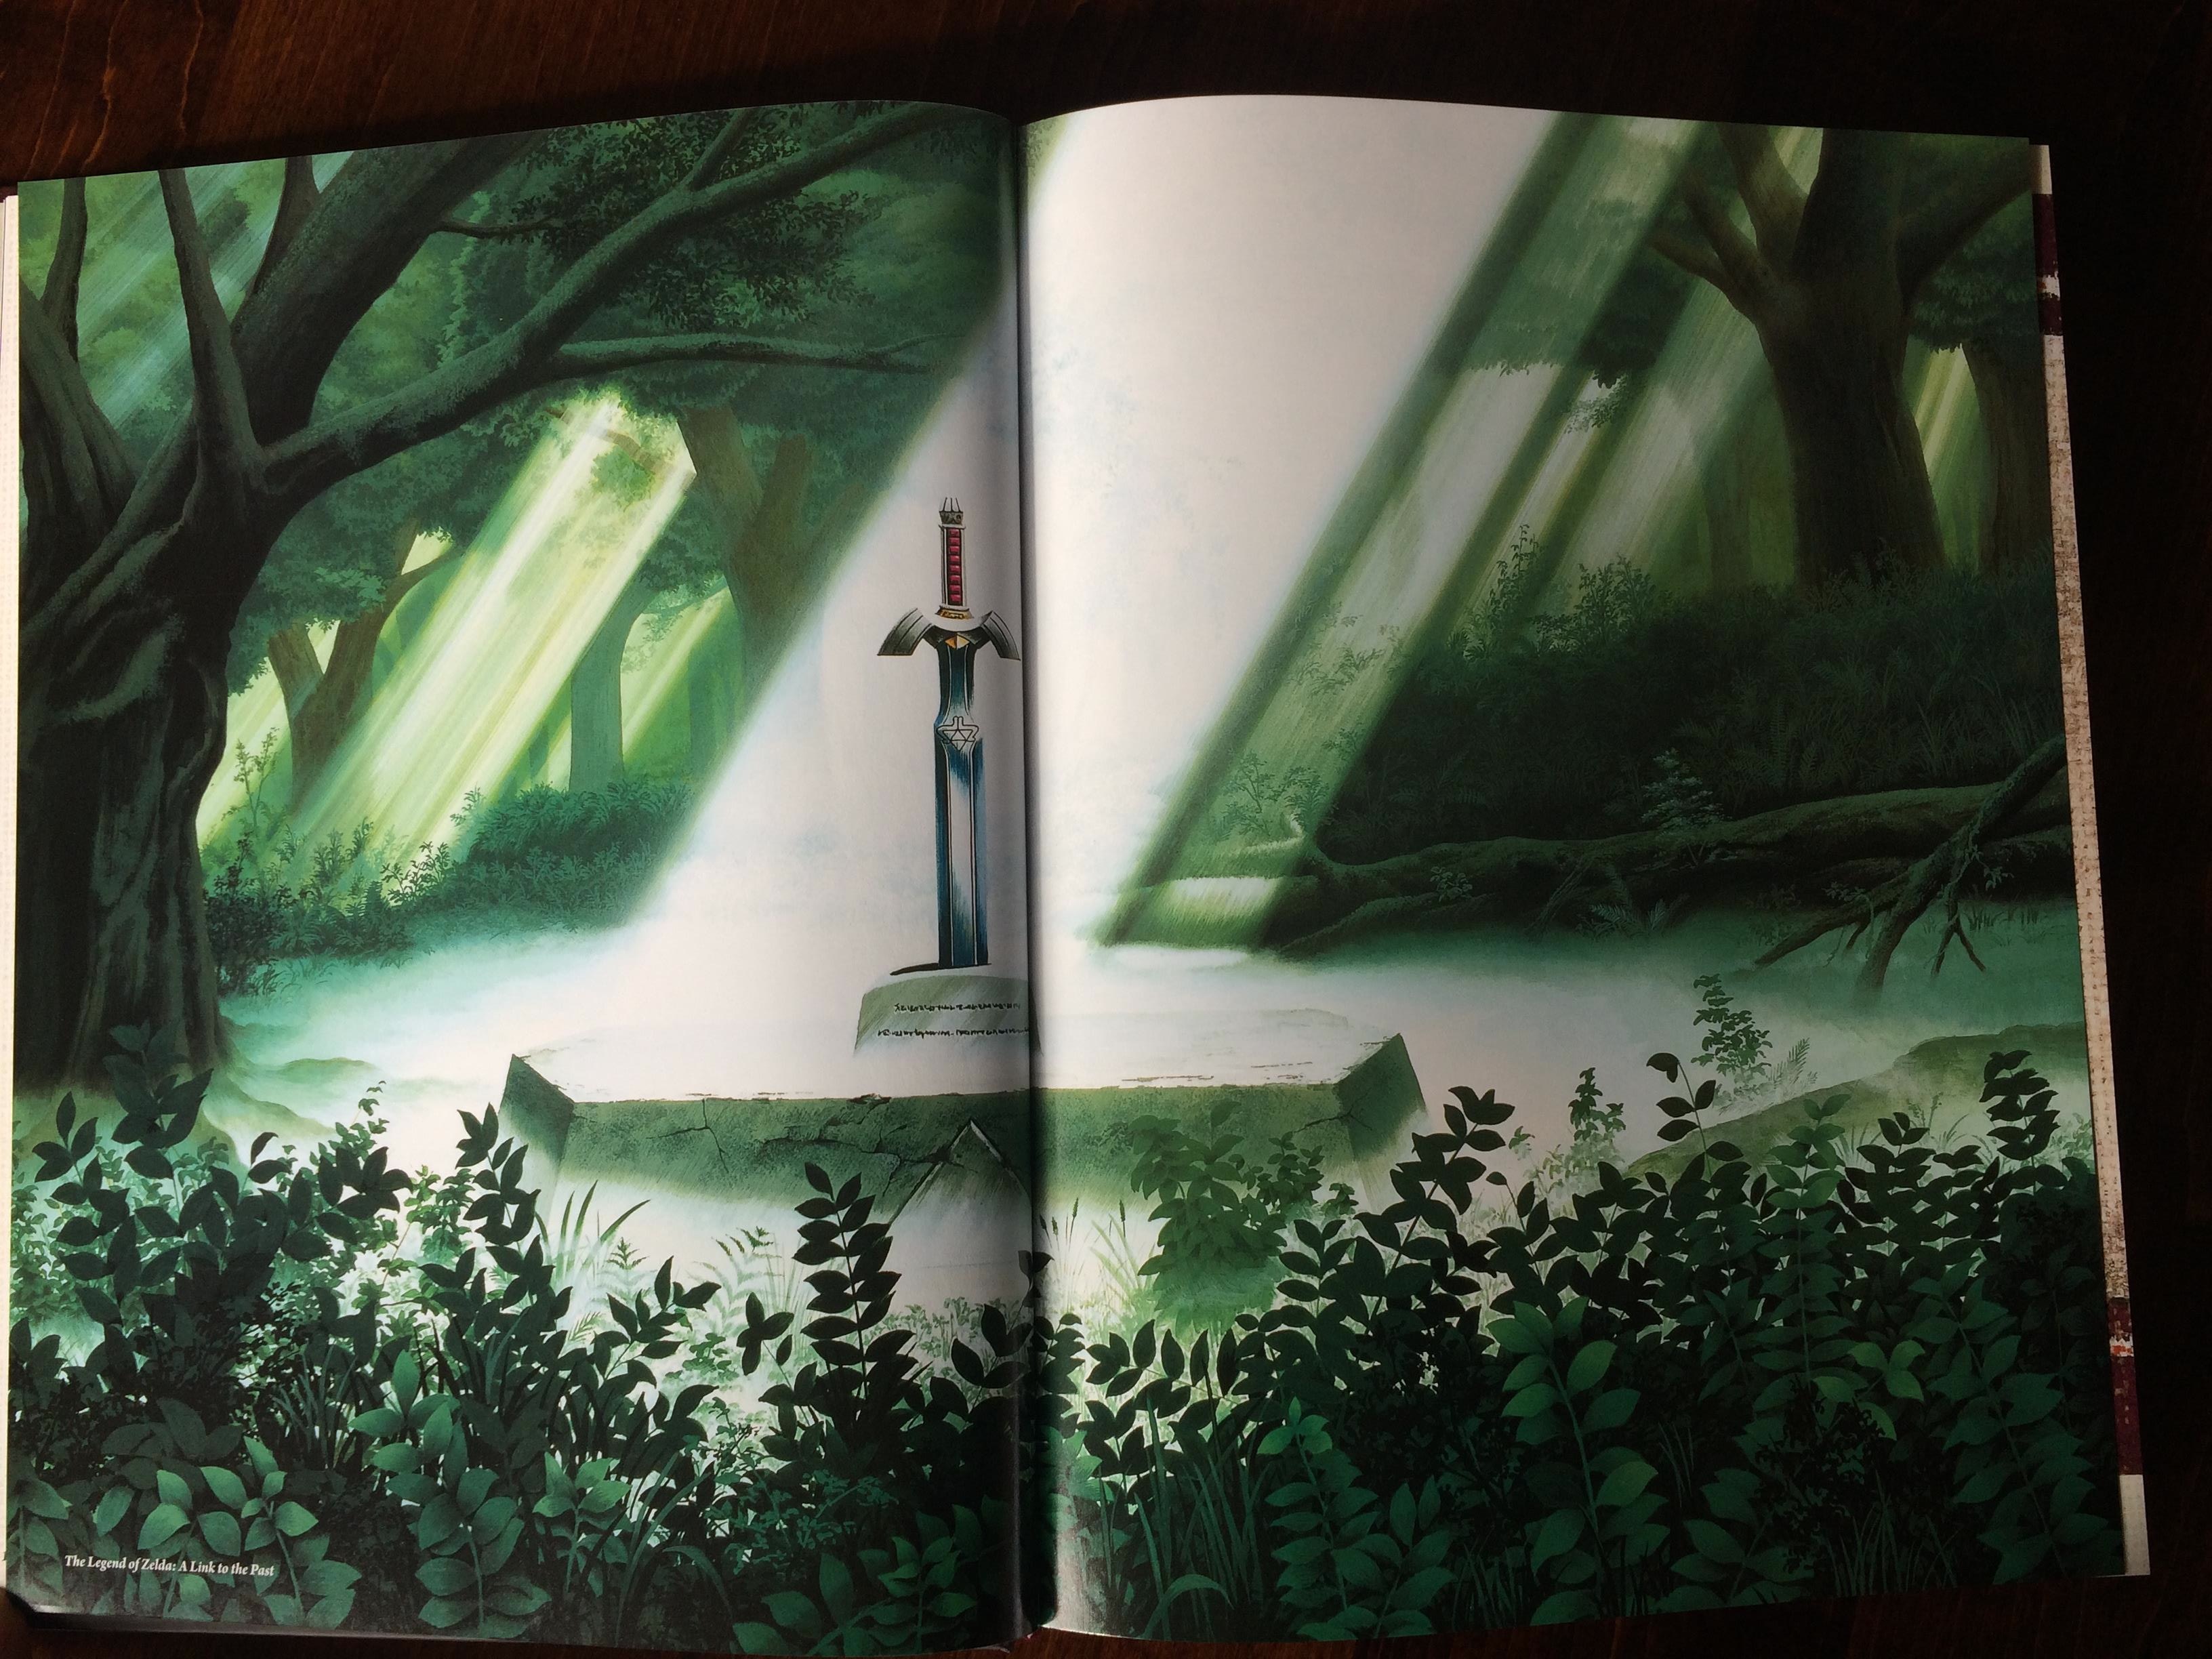 A beautiful two-page spread of art inspired by The Legend of Zelda: A Link to the Past